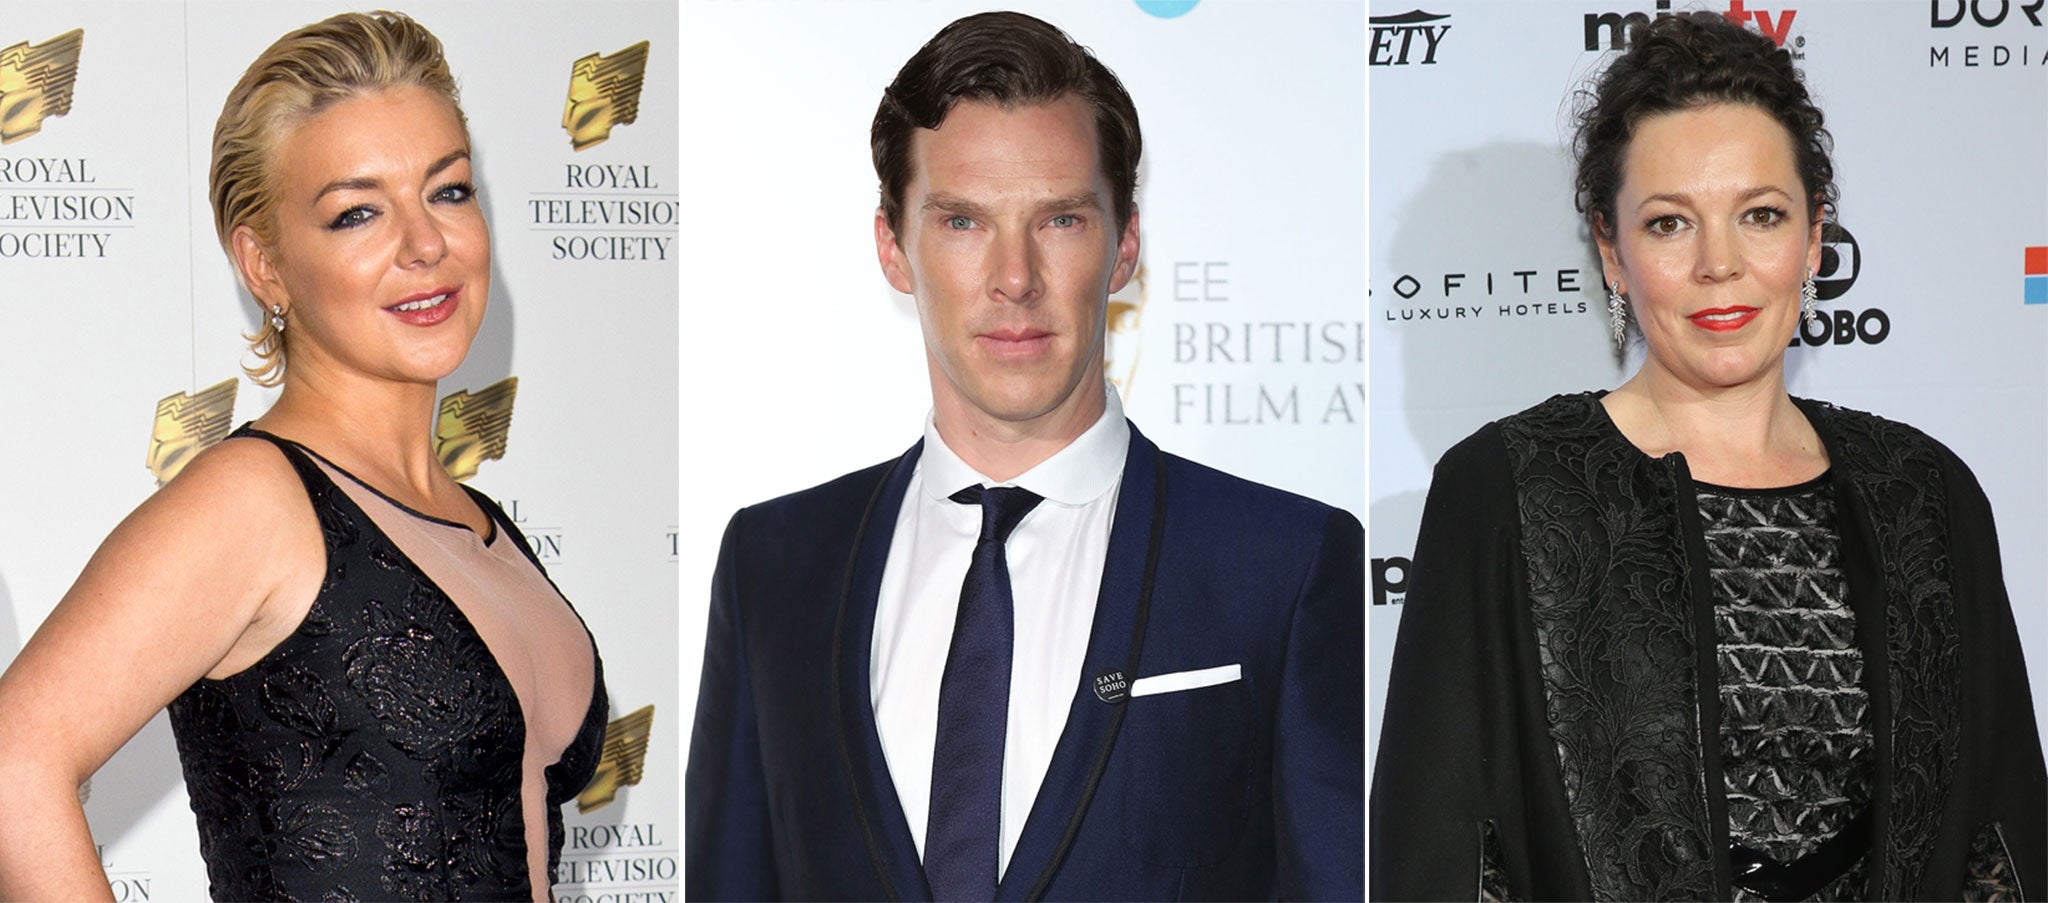 Sheridan Smith, Benedict Cumberbatch and Olivia Colman are nominated for Bafta TV Awards 2015